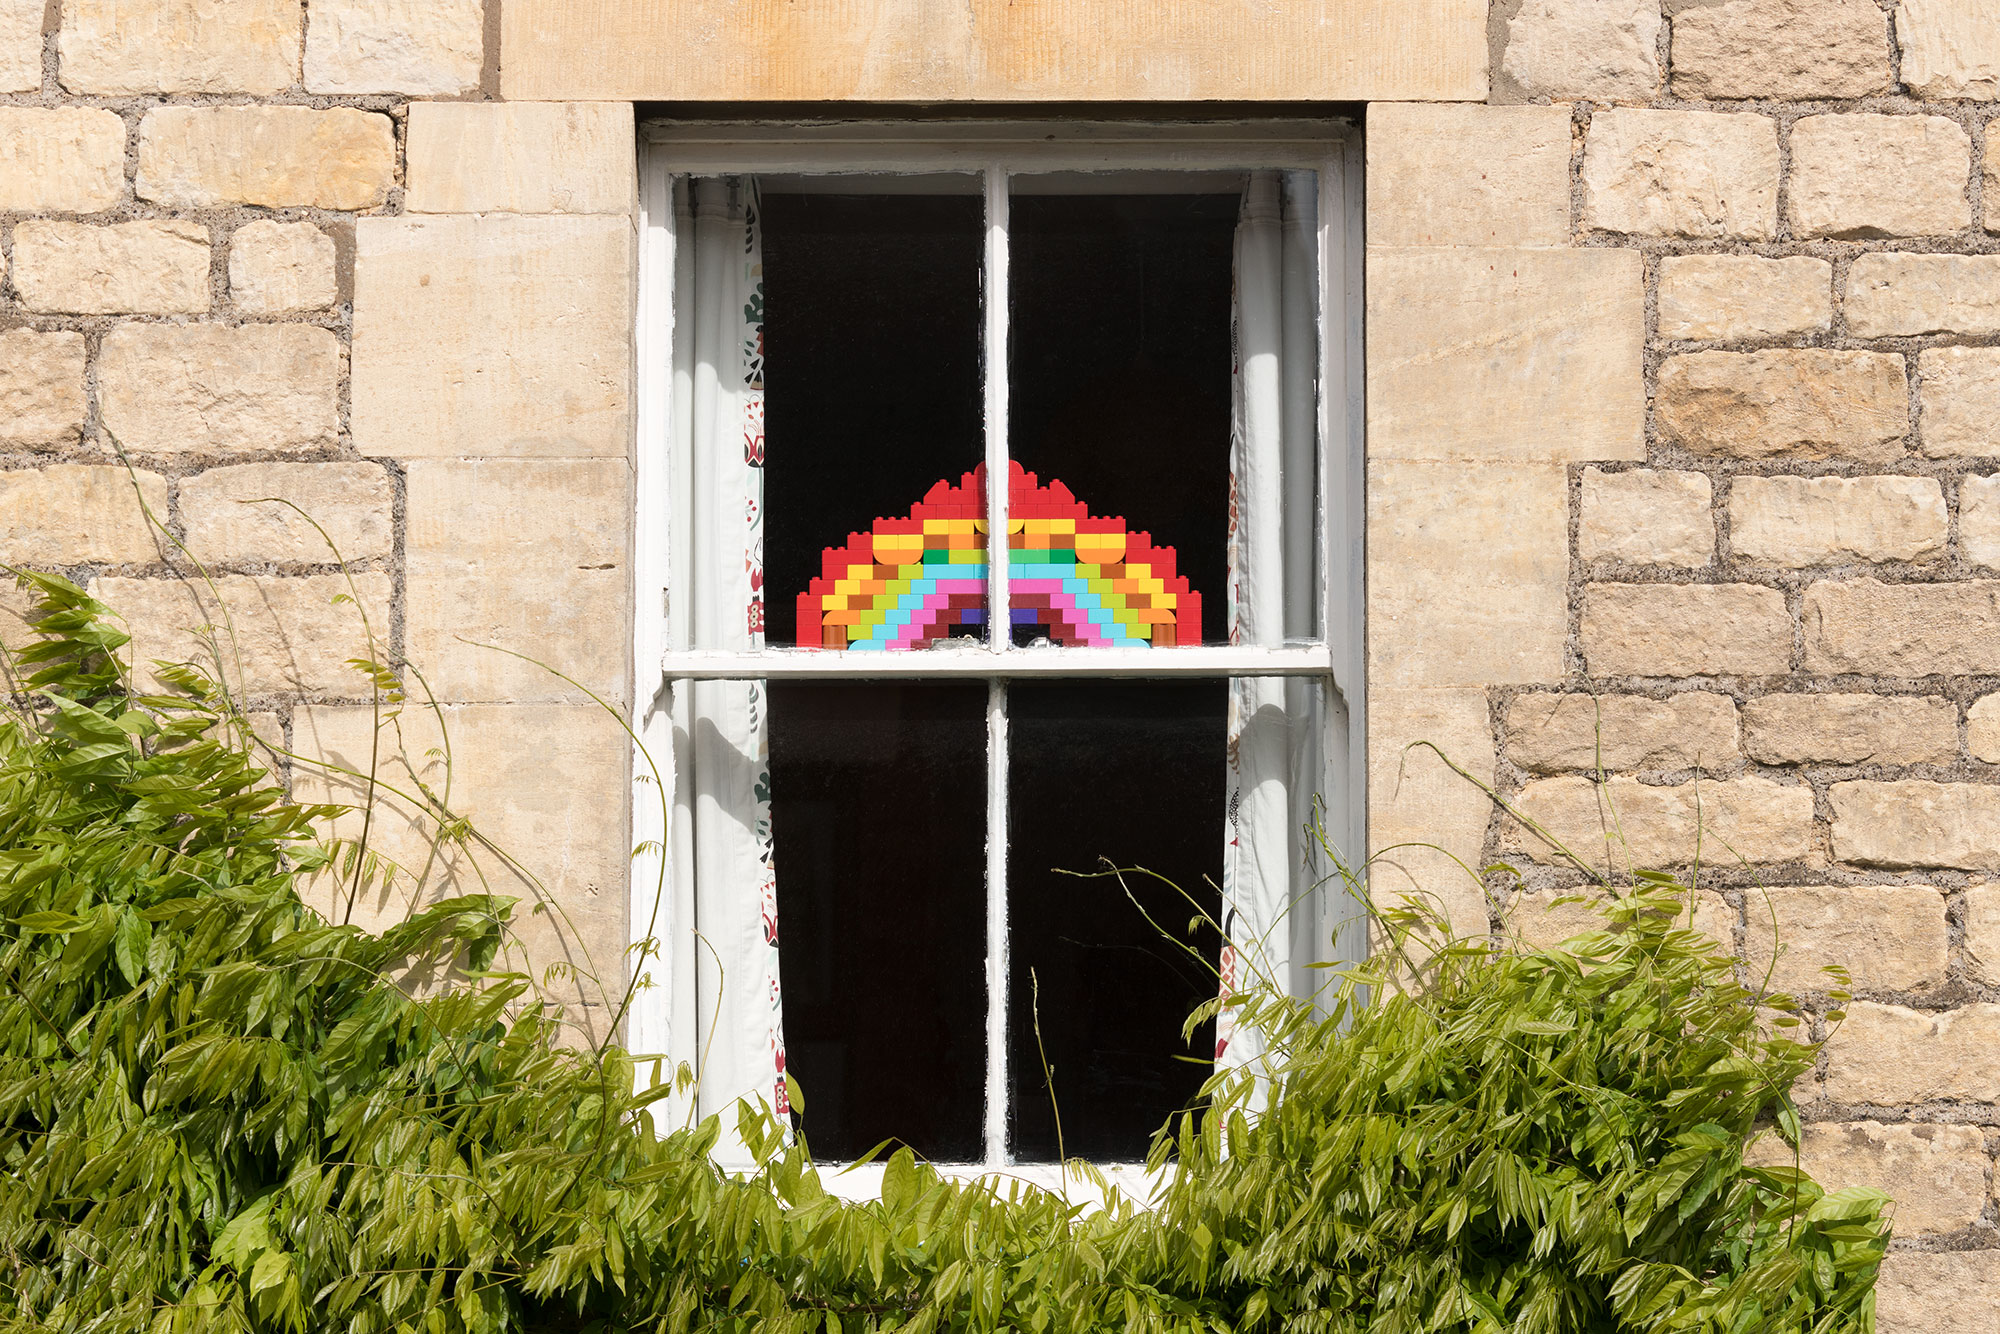 Photograph shows a view from a street of a window in a Cotswold stone house, in which is placed a rainbow made of lego.